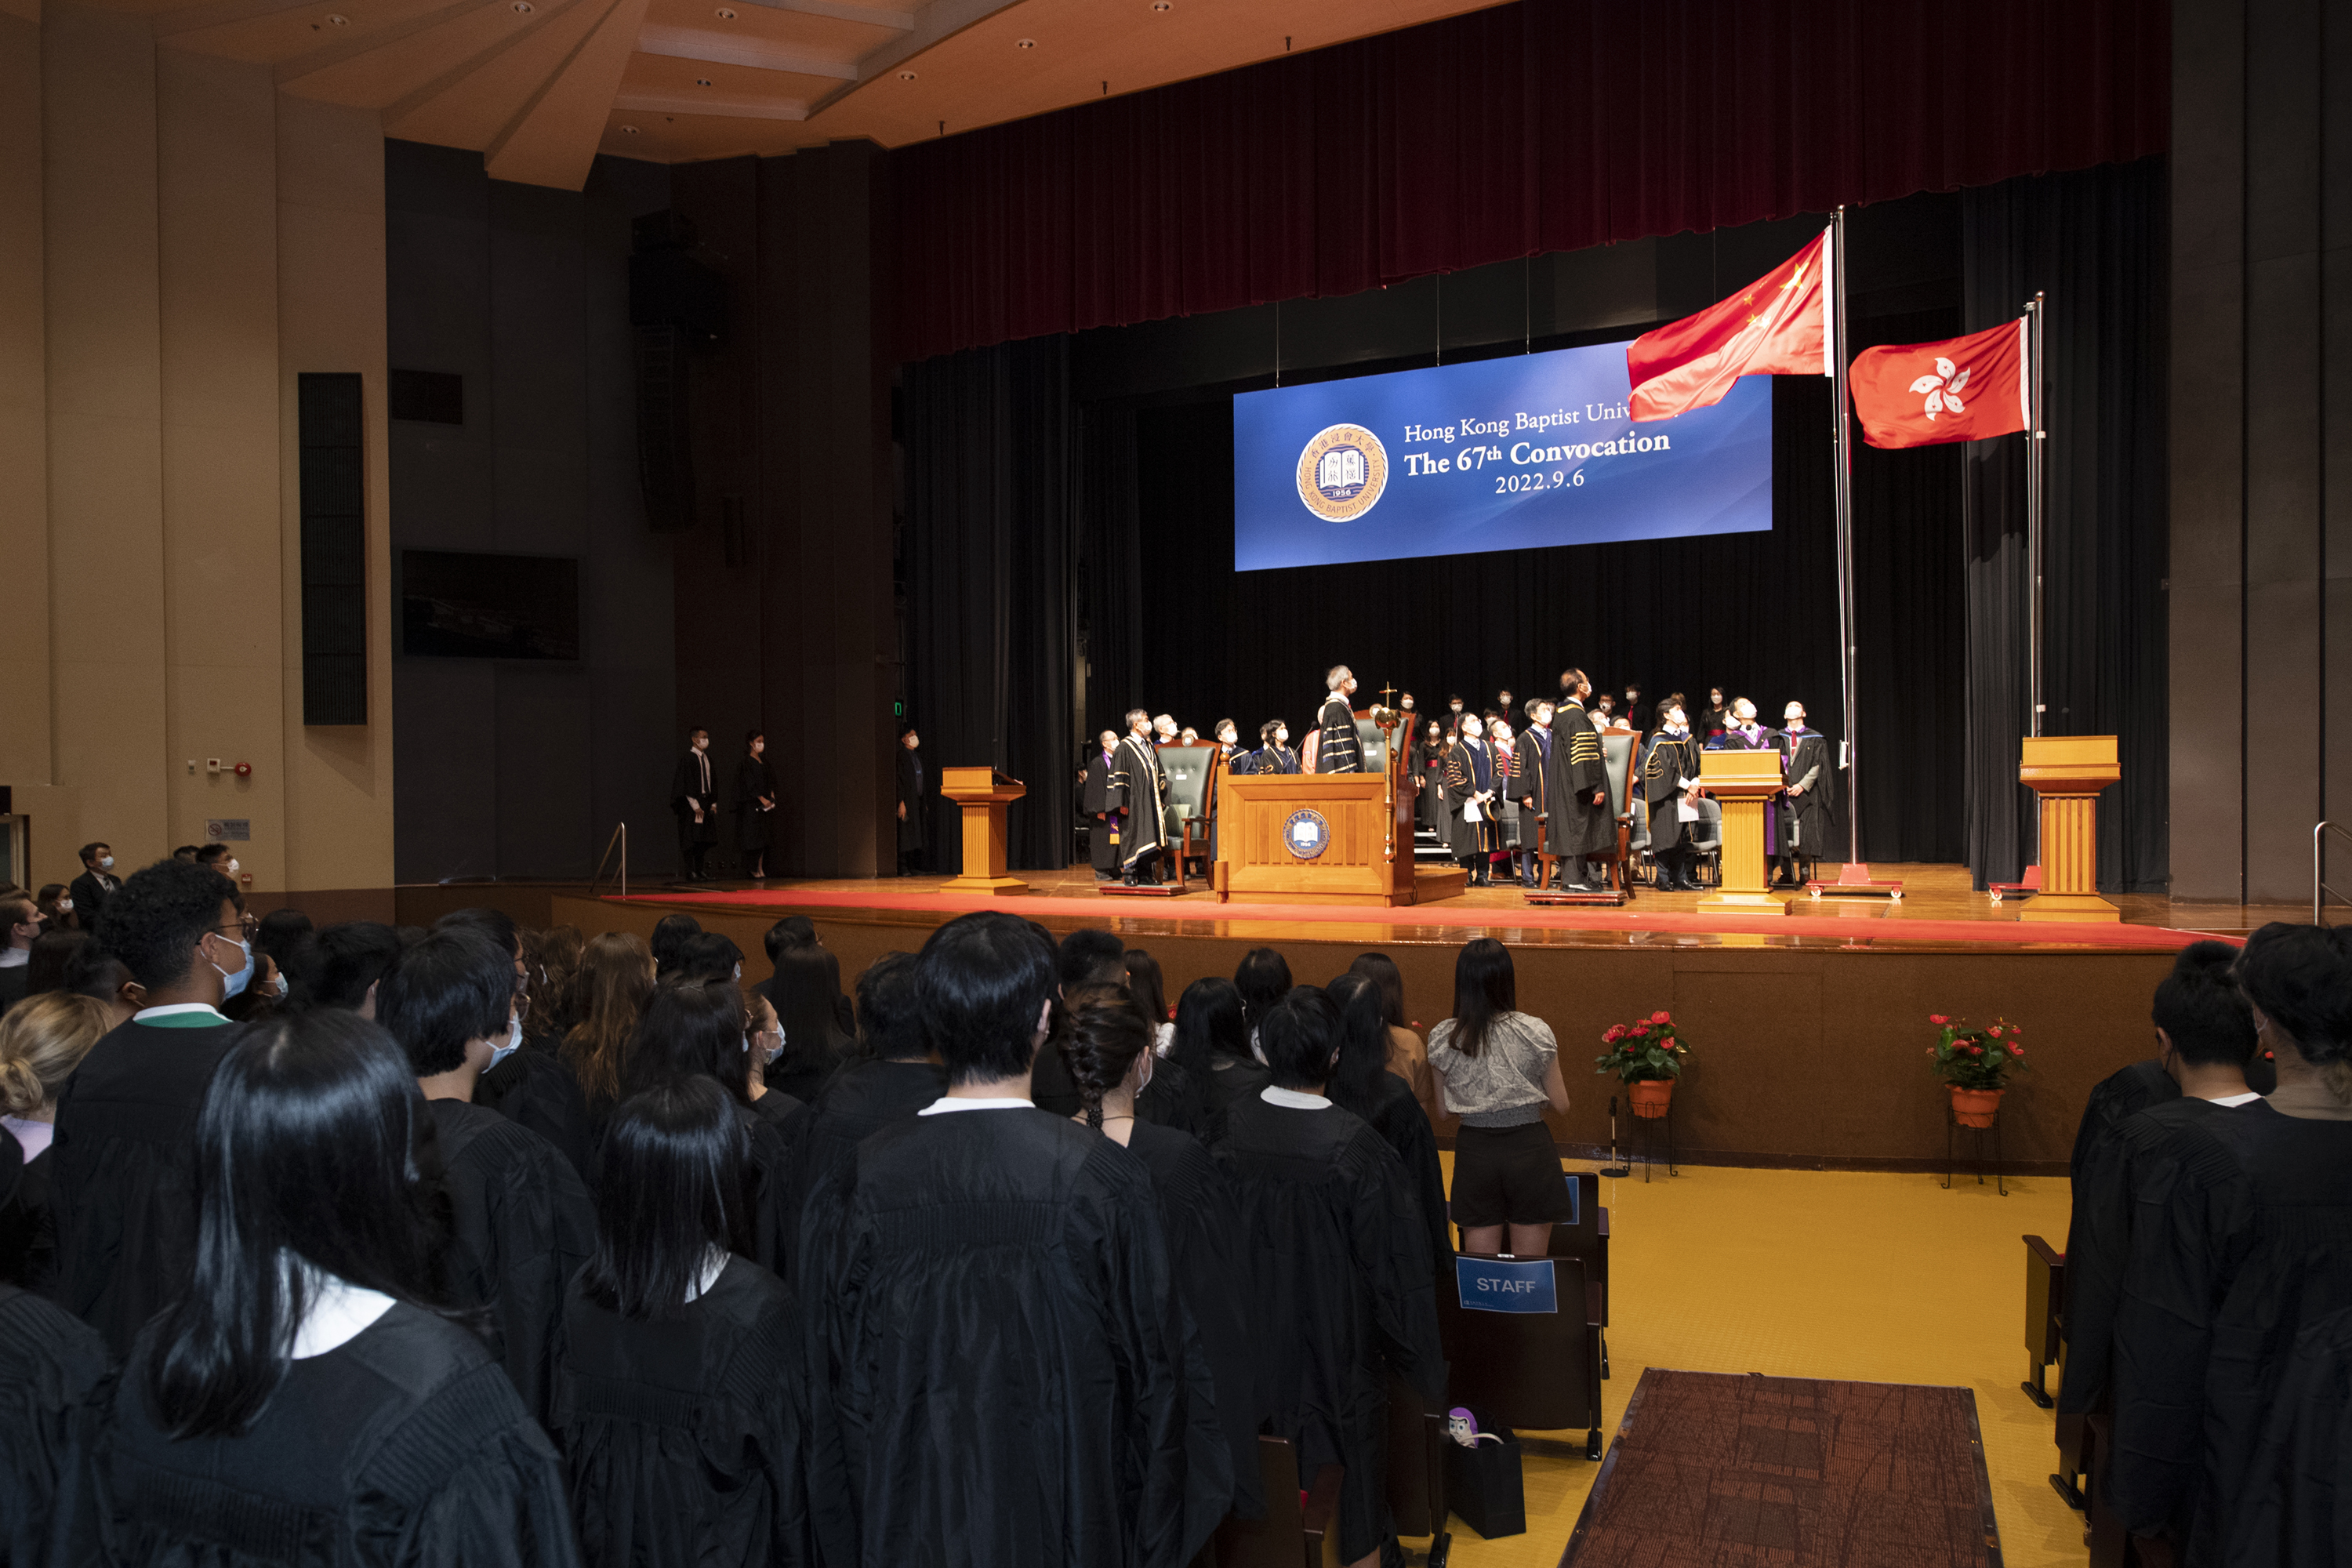 Before the 67th Convocation starts, HKBU students and staff members sing the National Anthem in front of the National Flag displayed at the venue.